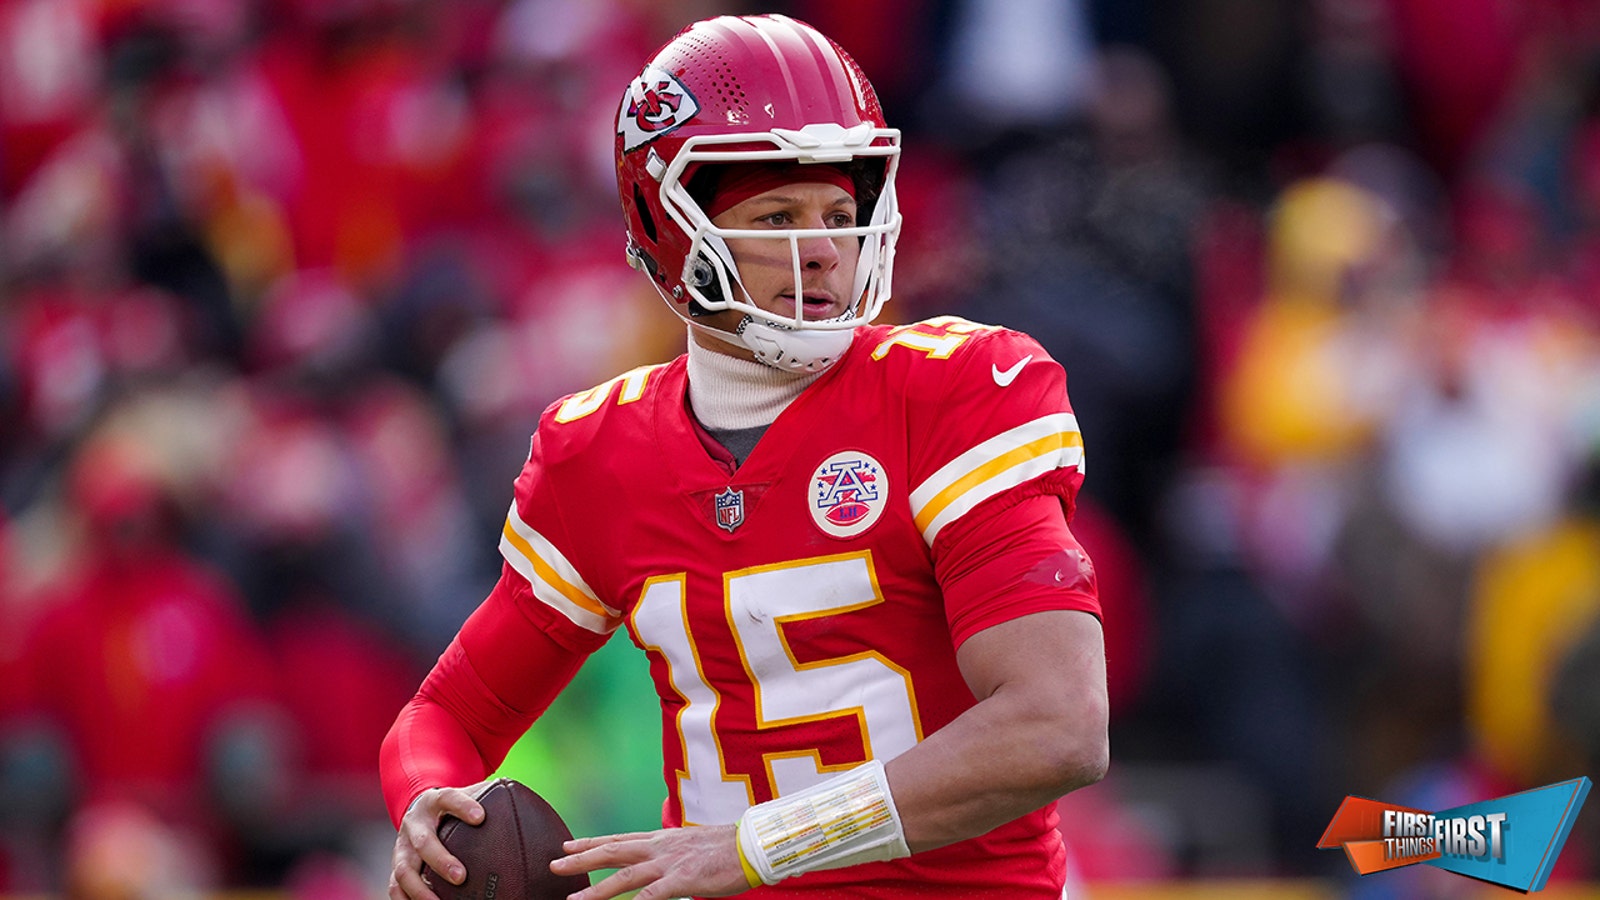 Mahomes: "We want to win the Super Bowl"